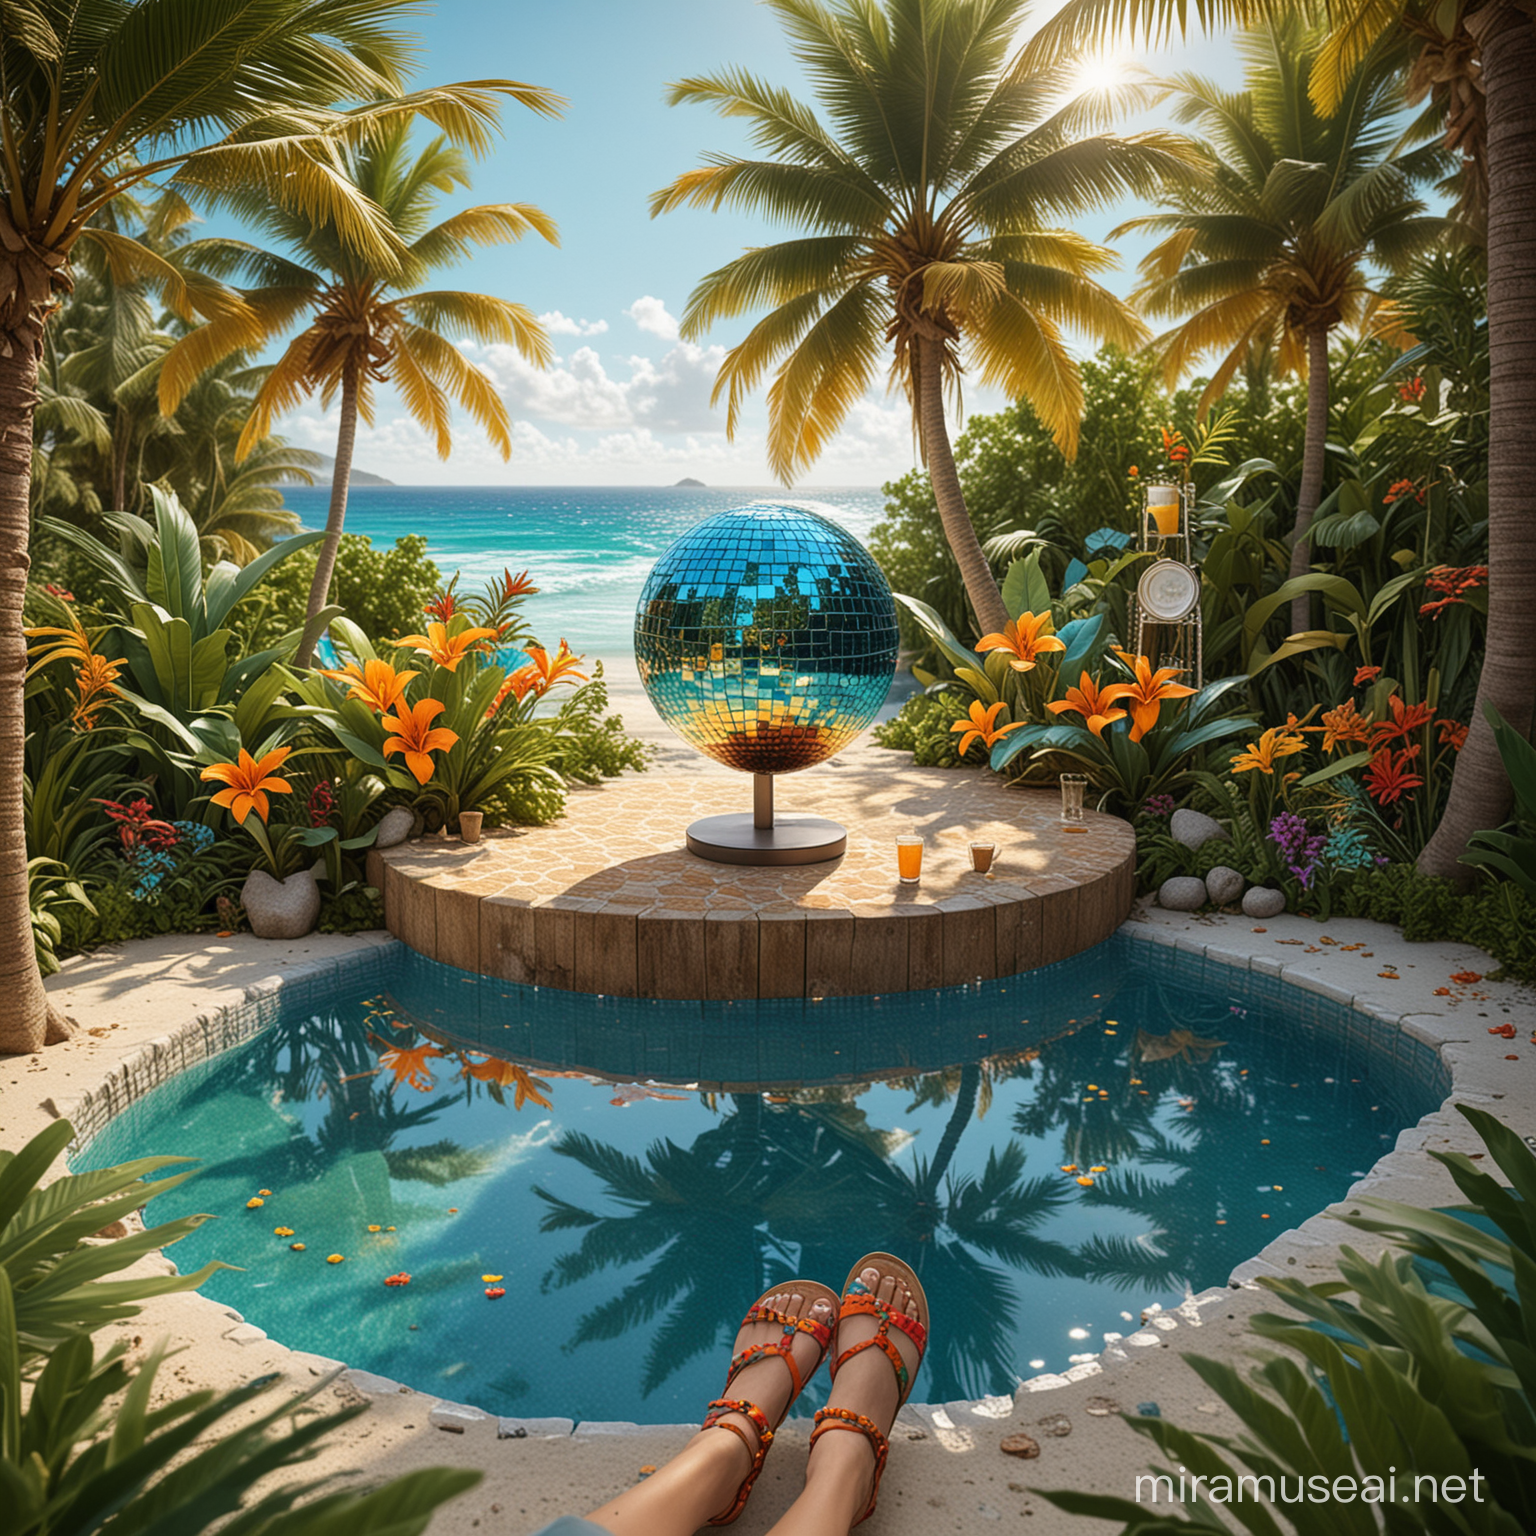 In this vivid and whimsical depiction of a miniature tropical island scene, envision a compact and surreal setting bursting with vibrant colors and playful elements that evoke the carefree spirit of an island getaway. At the center of this miniature paradise, a dazzling disco ball takes pride of place, casting a mosaic of bright and dynamic colors that symbolize the energetic and lively ambiance of island nightlife. The reflections from the disco ball dance across the scene, infusing it with a sense of celebration and joy. Surrounding the disco ball are the essential components of a tropical beach retreat: tall and swaying palm trees that whisper in the gentle breeze, creating a tropical oasis; a modern speaker poised to kickstart the party with upbeat tunes; a refreshing cocktail in a blue glass, garnished with a slice of lemon, ready to quench the thirst of revelers; a vintage-style orange radio emitting the nostalgic beats of summer melodies; and a pair of large, stylish sunglasses with reflective turquoise lenses, adding a touch of chic sophistication to the scene. Completing this vacation tableau are a pair of casual flip-flops casually laid on the sandy beach, inviting one to kick off their shoes and dance barefoot under the sun, embodying the carefree and relaxed atmosphere of a tropical escape. Set against a clear sky background that enhances the tropical paradise vibe, this imaginative and playful scene pays homage to the joy, relaxation, and vibrancy of a beach holiday in a fun and compact format. Rendered in hyper-realistic 32k resolution, the scene bursts with vivid colors and intricate details, inviting viewers to immerse themselves in this miniature world of tropical delight and whimsy.